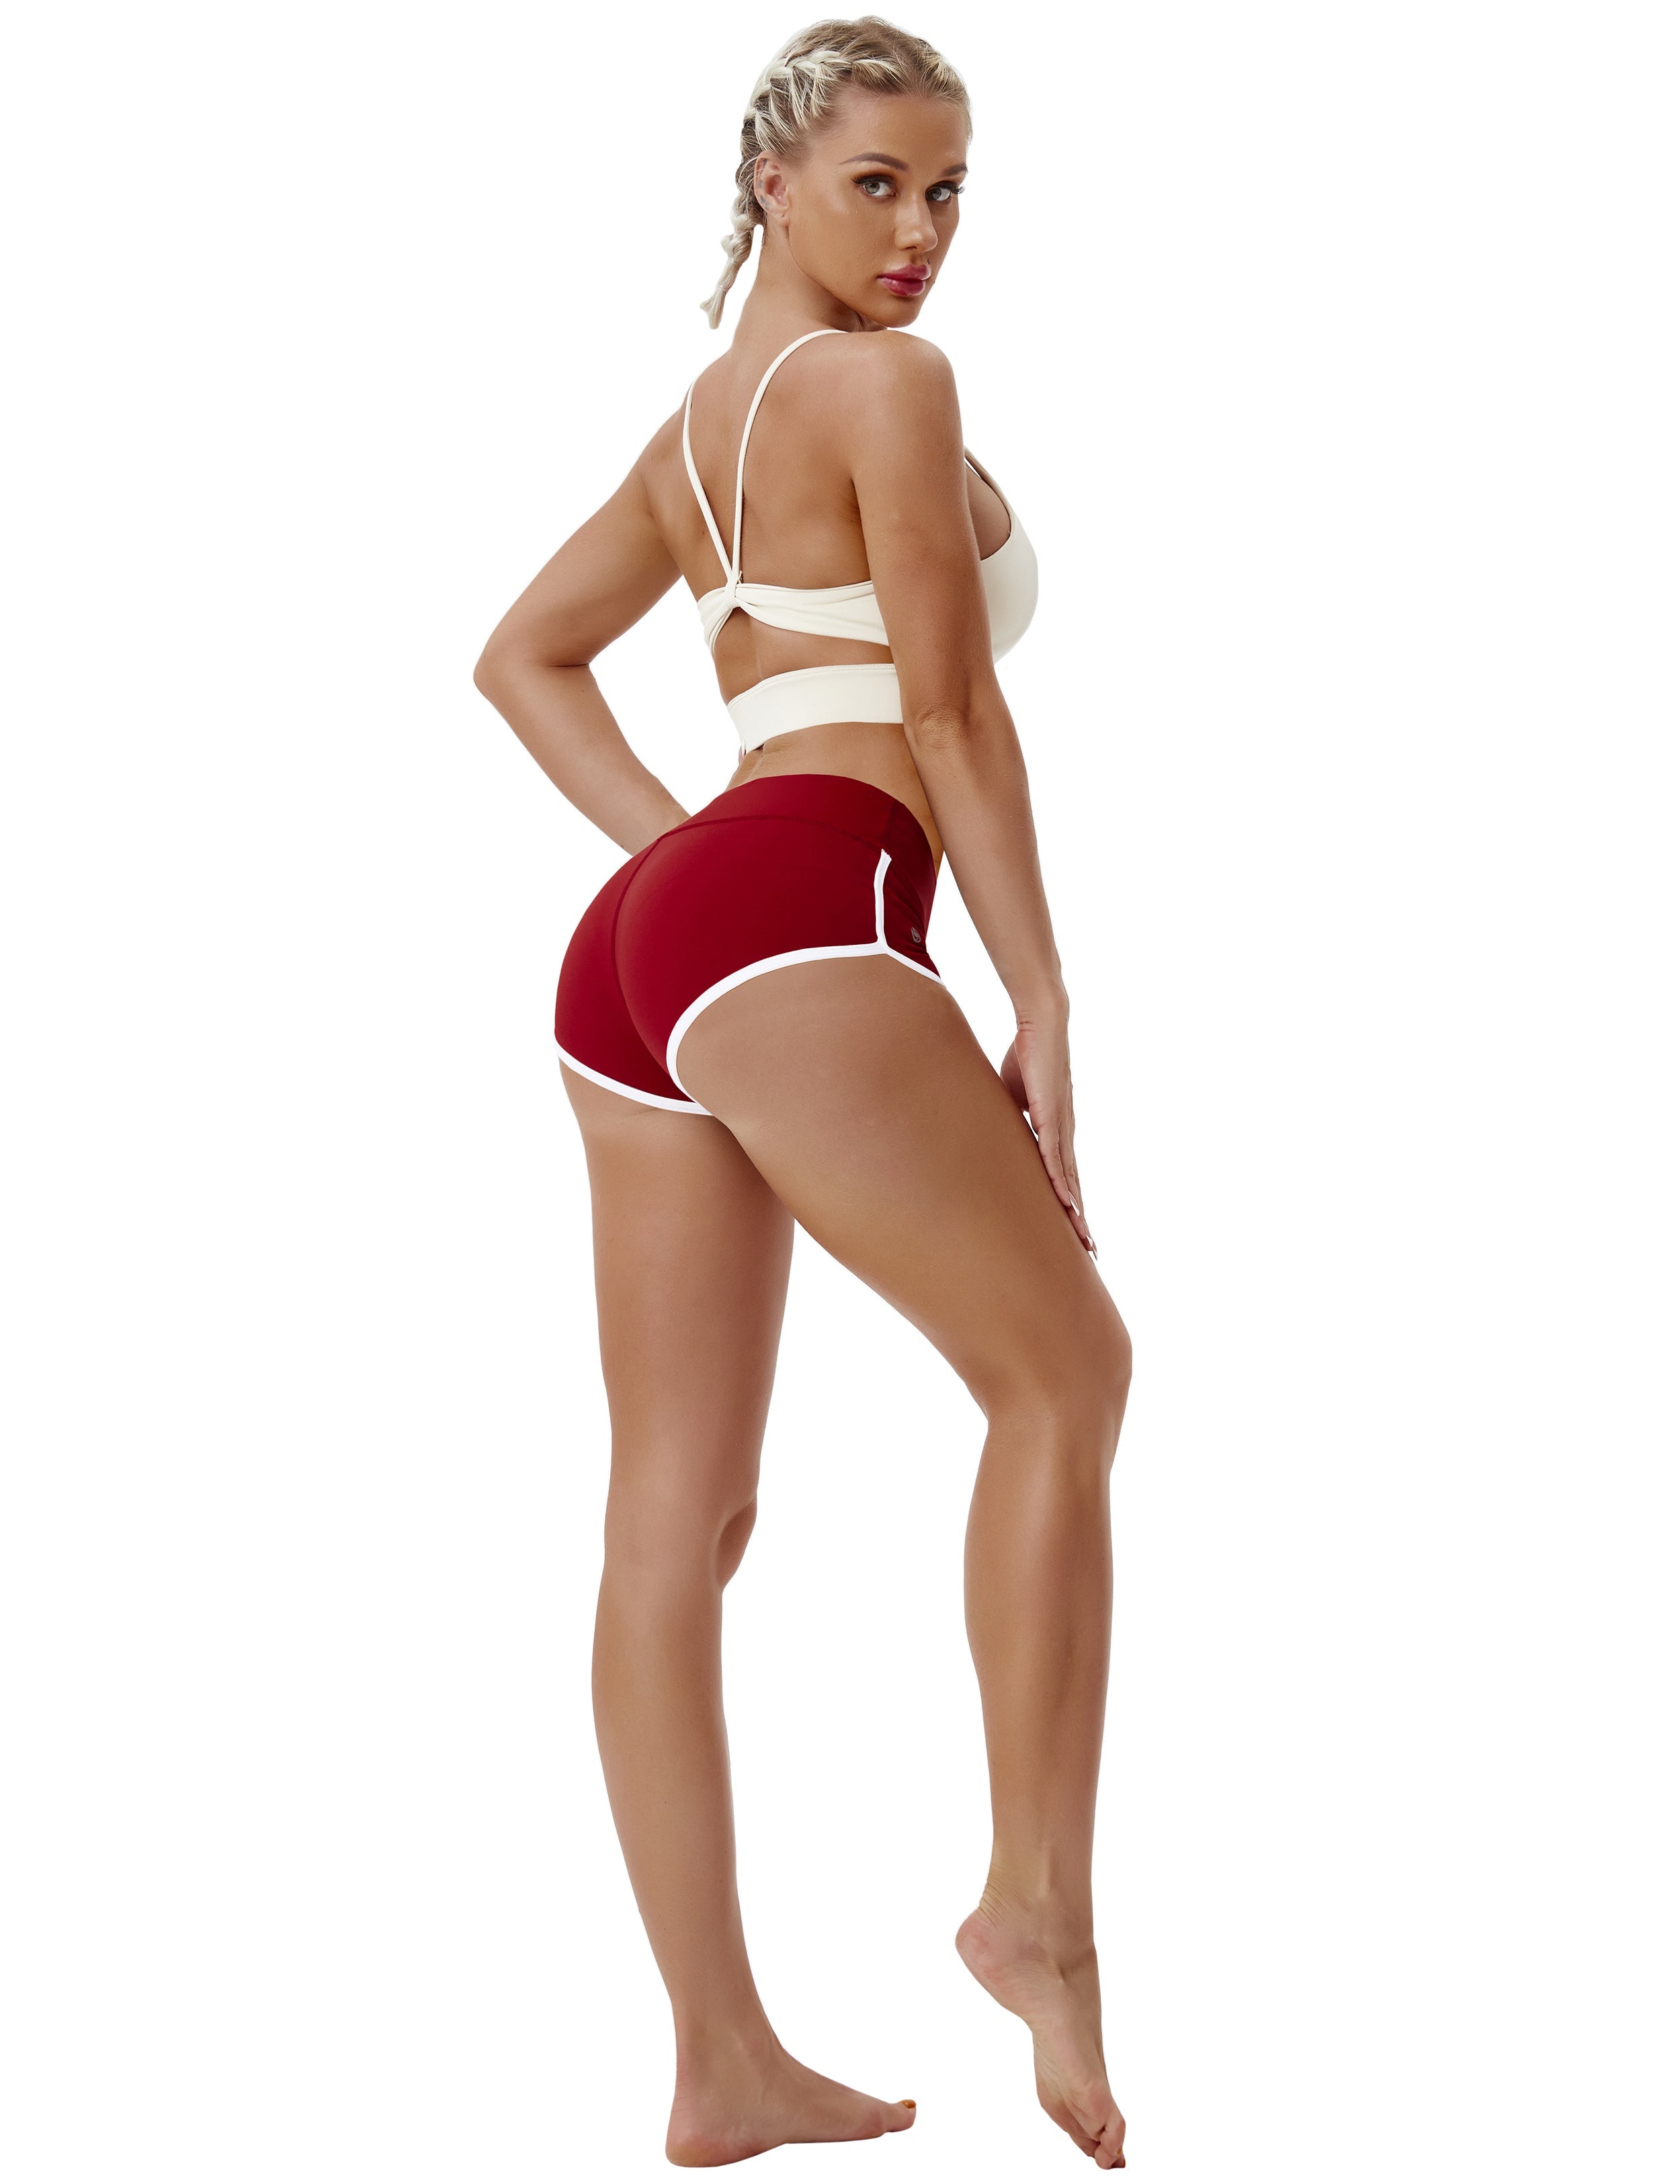 Sexy Booty Golf Shorts cherryred Sleek, soft, smooth and totally comfortable: our newest sexy style is here. Softest-ever fabric High elasticity High density 4-way stretch Fabric doesn't attract lint easily No see-through Moisture-wicking Machine wash 75%Nylon/25%Spandex